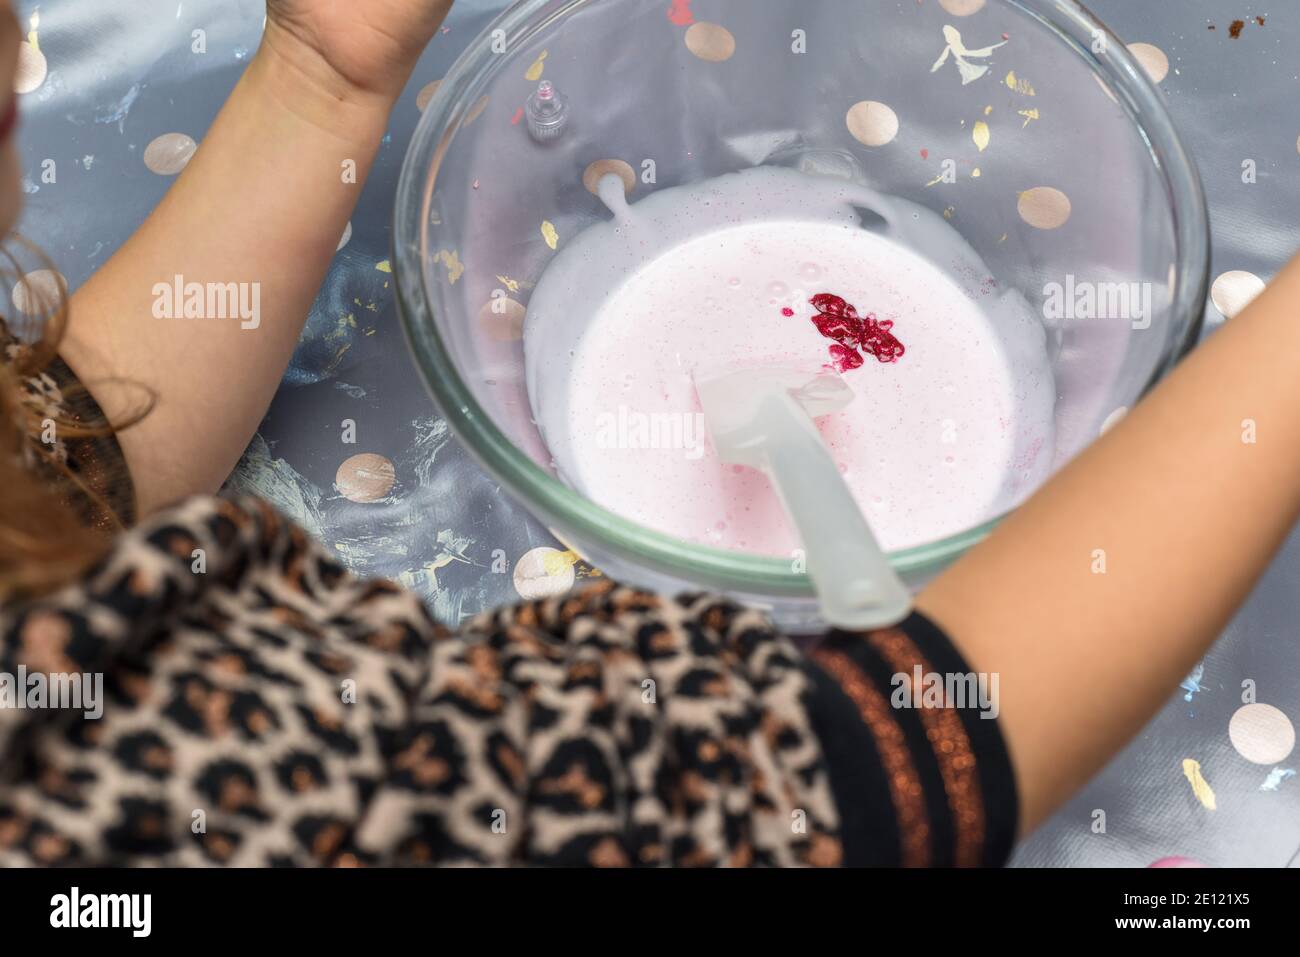 Kids activity of making slime as a science experiment for children to do indoors Stock Photo